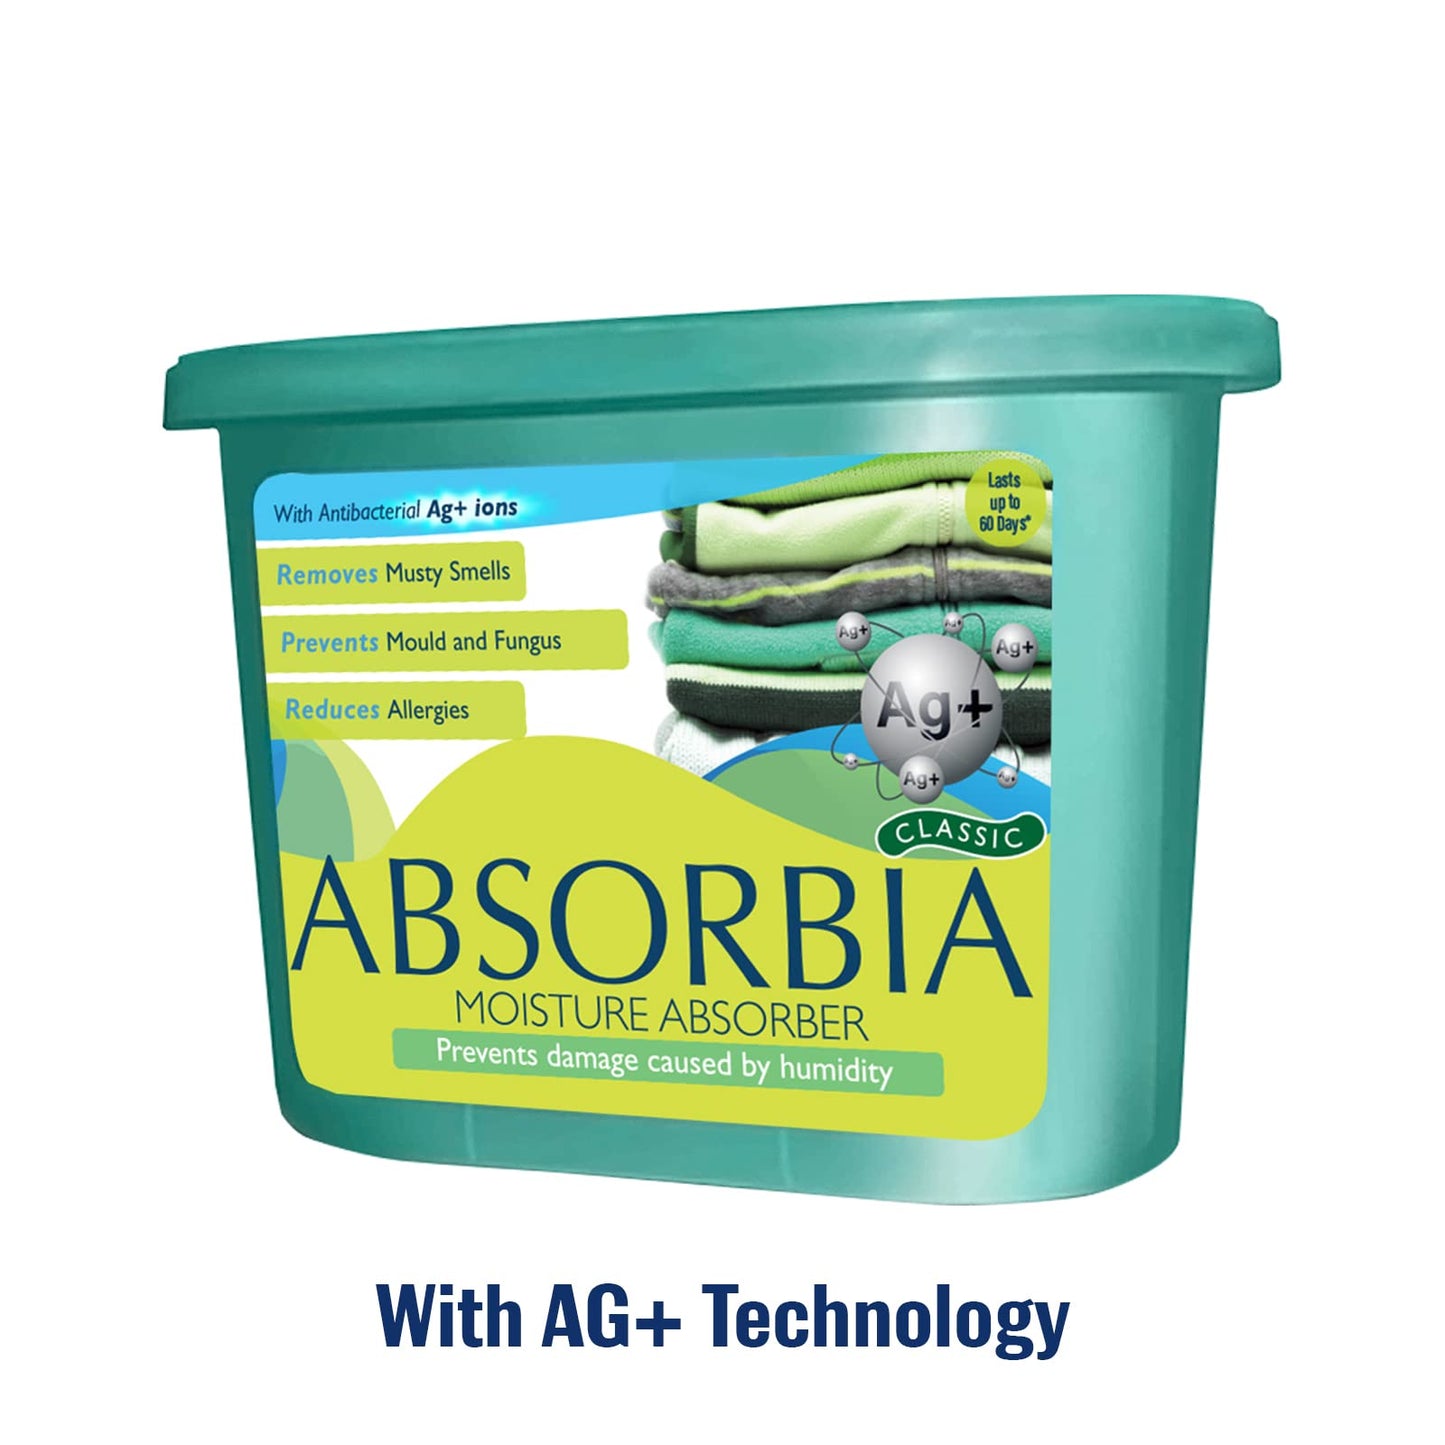 Absorbia Classic with "AG+ ION" - Family Pack of 3 (600ml Each),Fights Strongly Against Moisture, Mould, Fungus & Musty smells